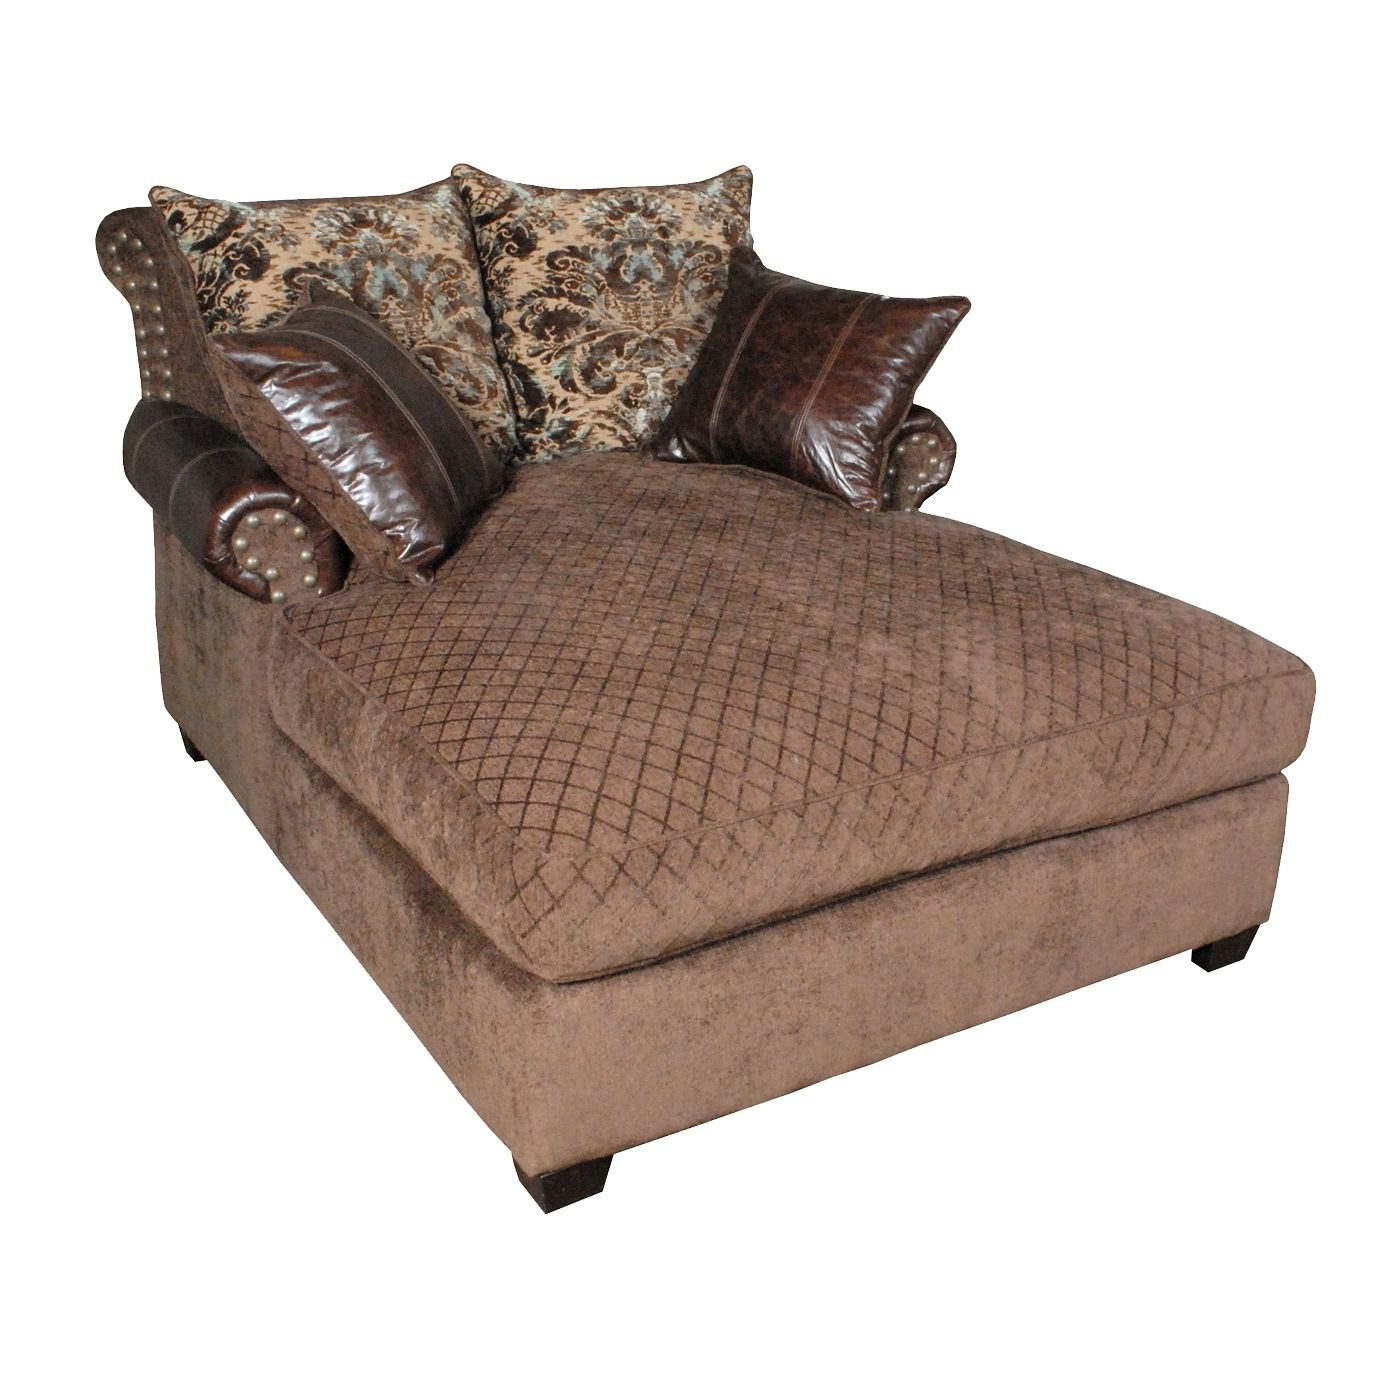 Most Recently Released Oversized Chaise Lounge – Decofurnish In Oversized Indoor Chaise Lounges (View 10 of 15)